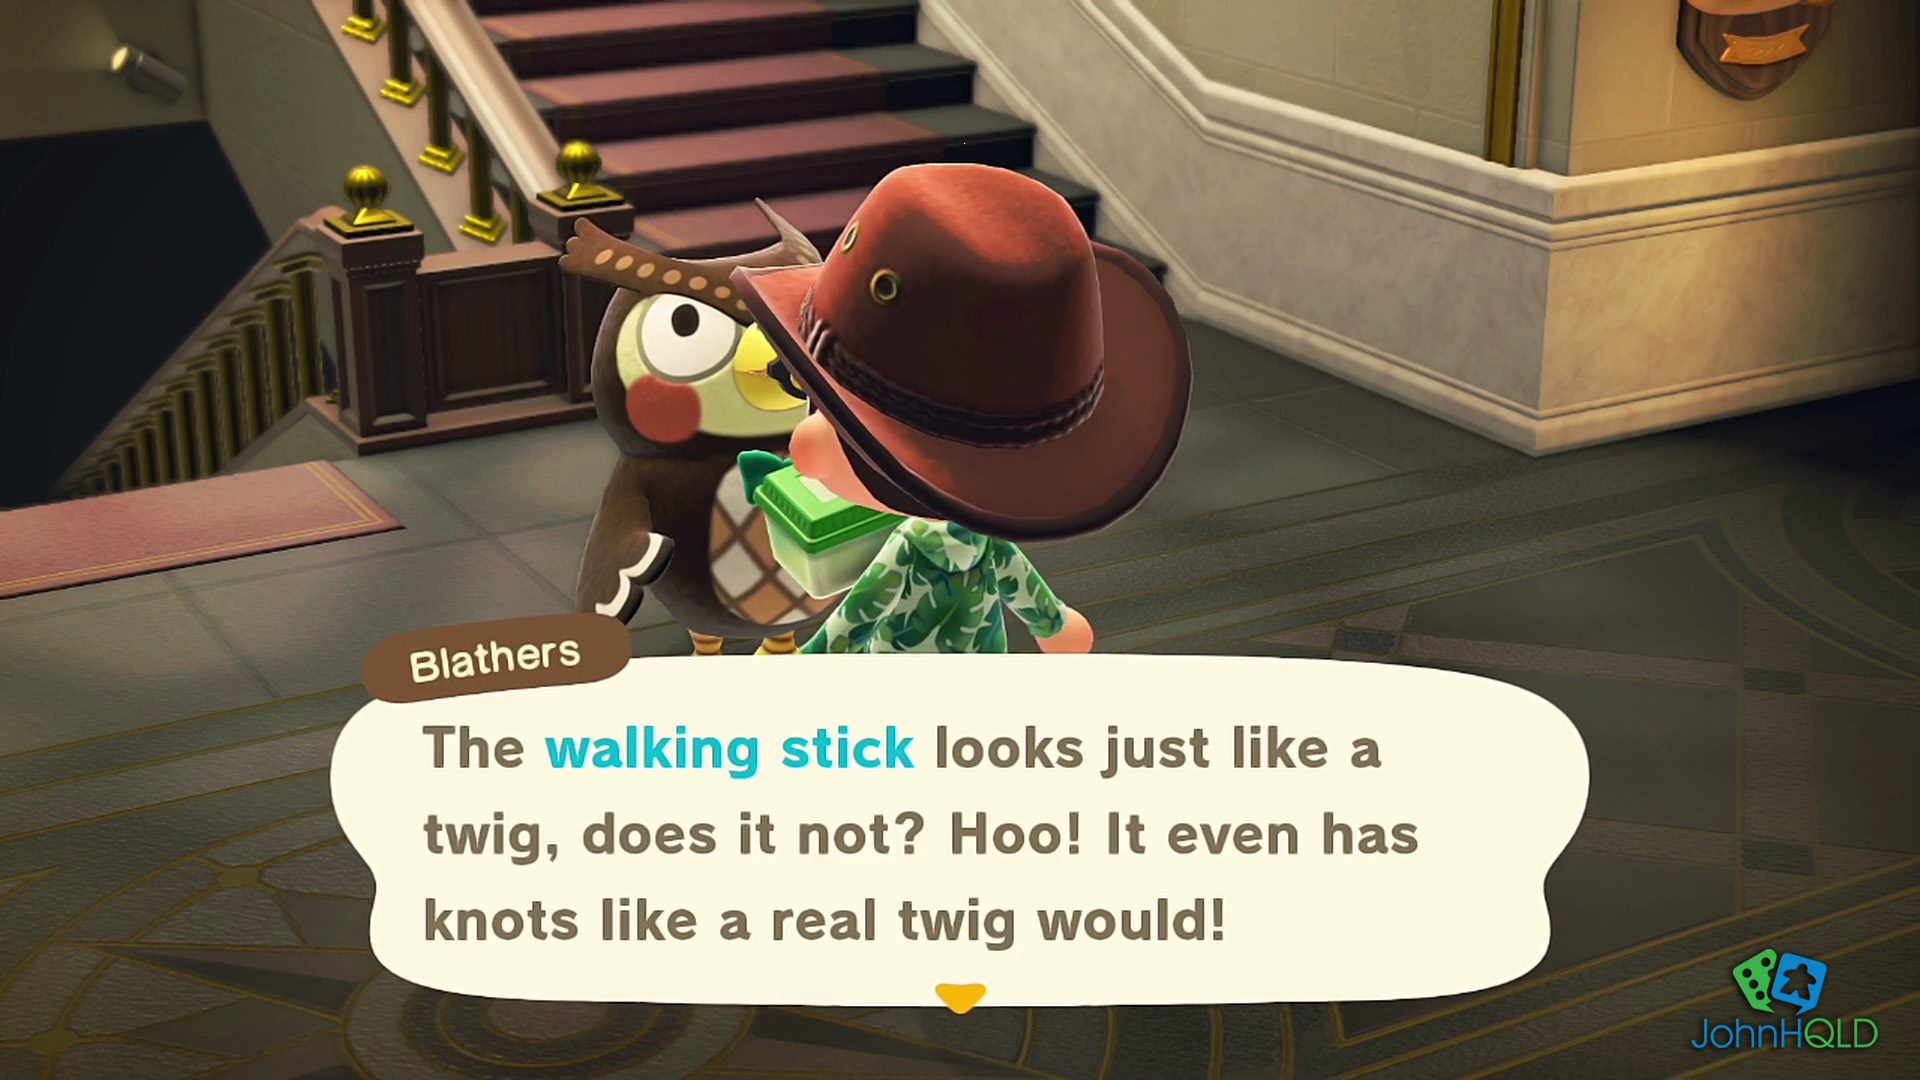 20220131 - Animal Crossing New Horizons - Walking stick insect acquired